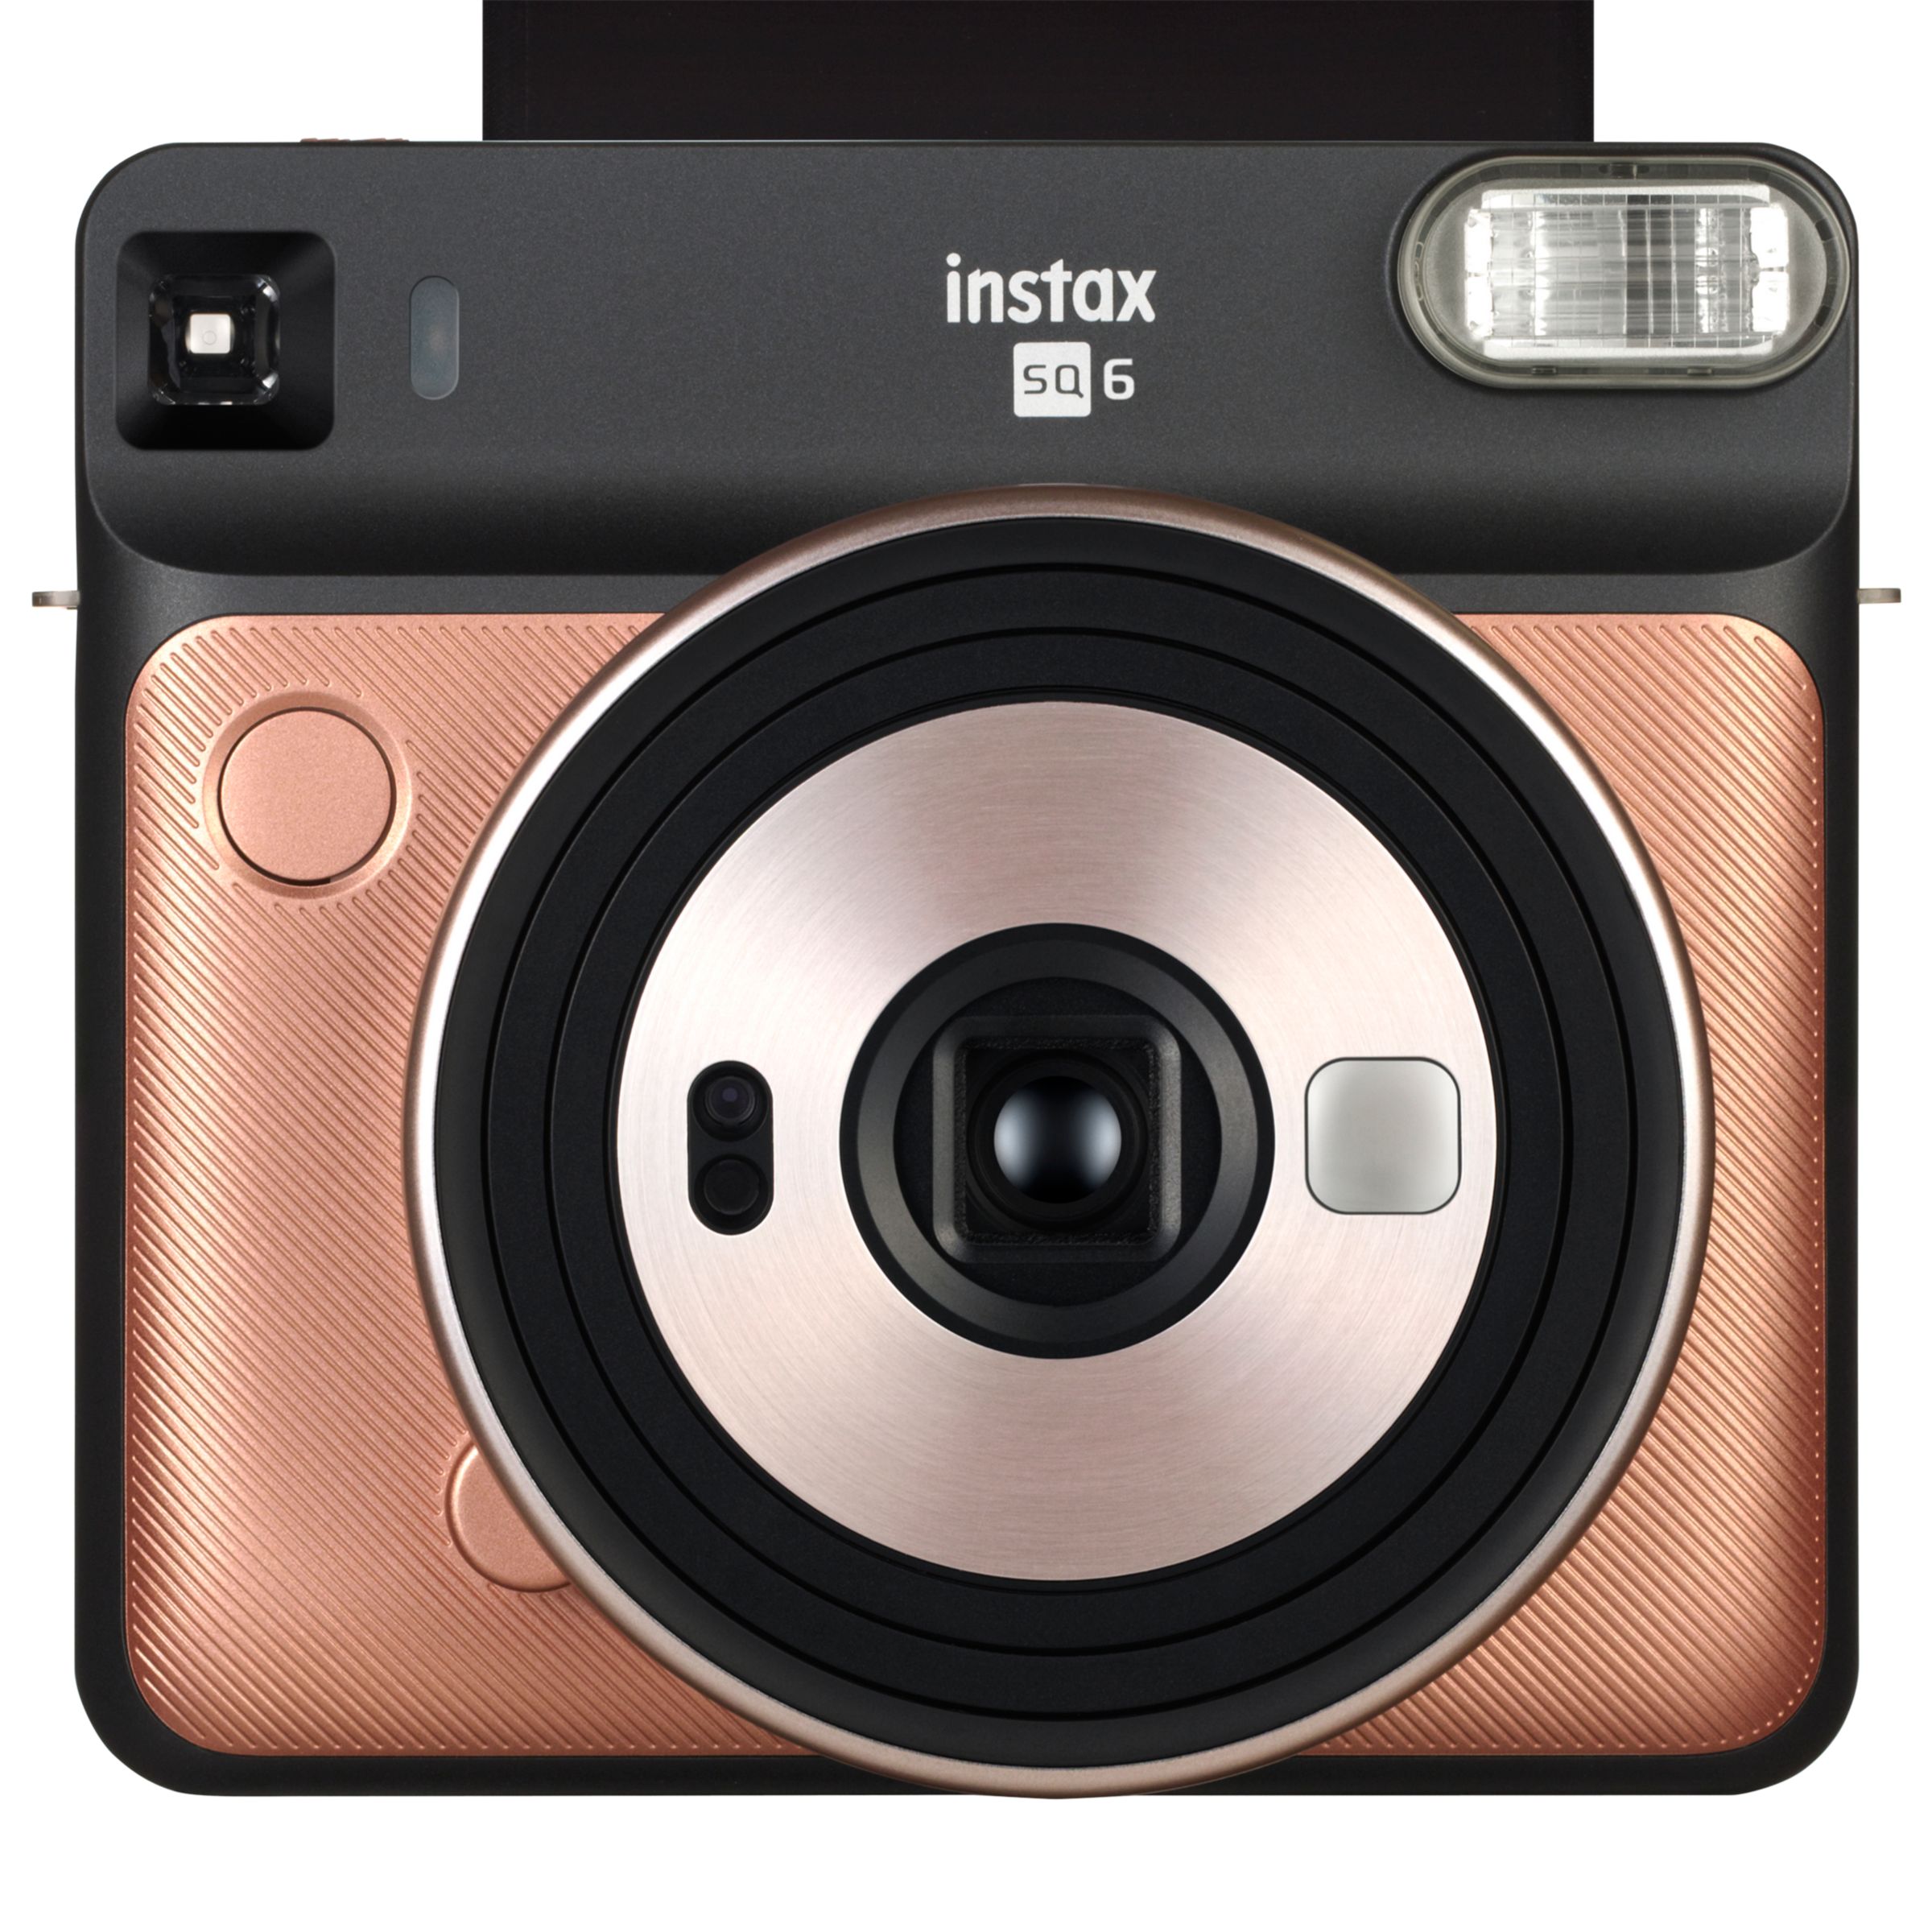 Image of Fujifilm Instax SQUARE SQ6 Instant Camera with Selfie Mode BuiltIn Flash and Shoulder Strap